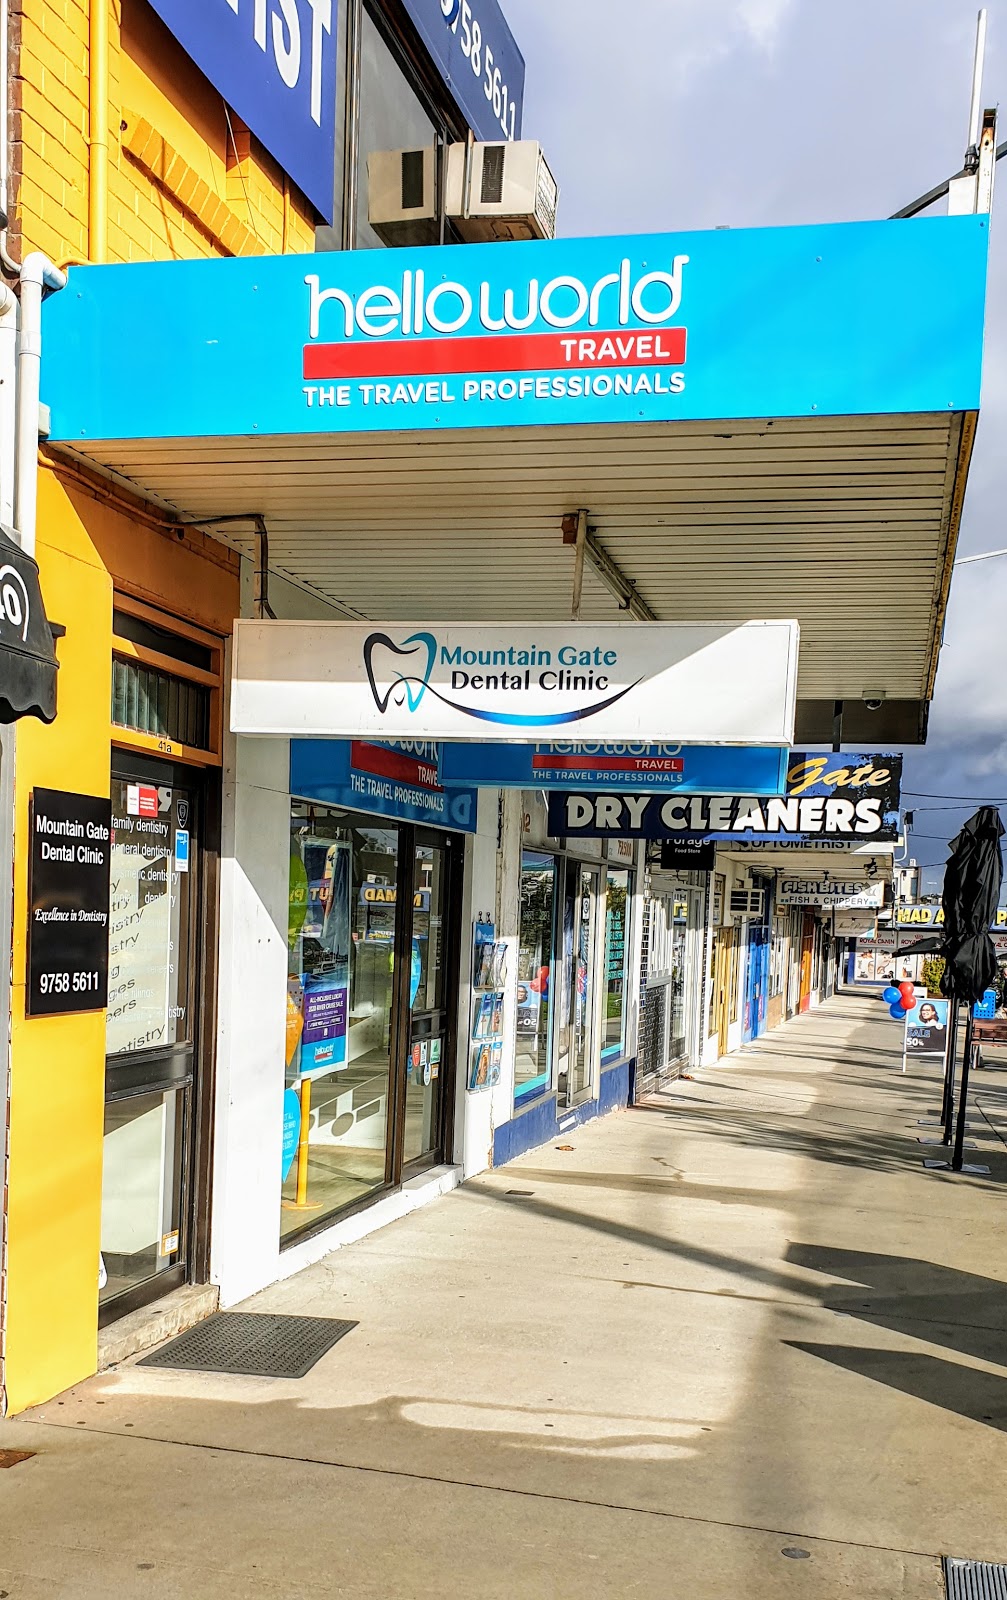 Helloworld Travel Ferntree Gully | travel agency | 1880 Ferntree Gully Rd, Shop 41, Mountain Gate Shopping Centre, Ferntree Gully VIC 3156, Australia | 0397587088 OR +61 3 9758 7088